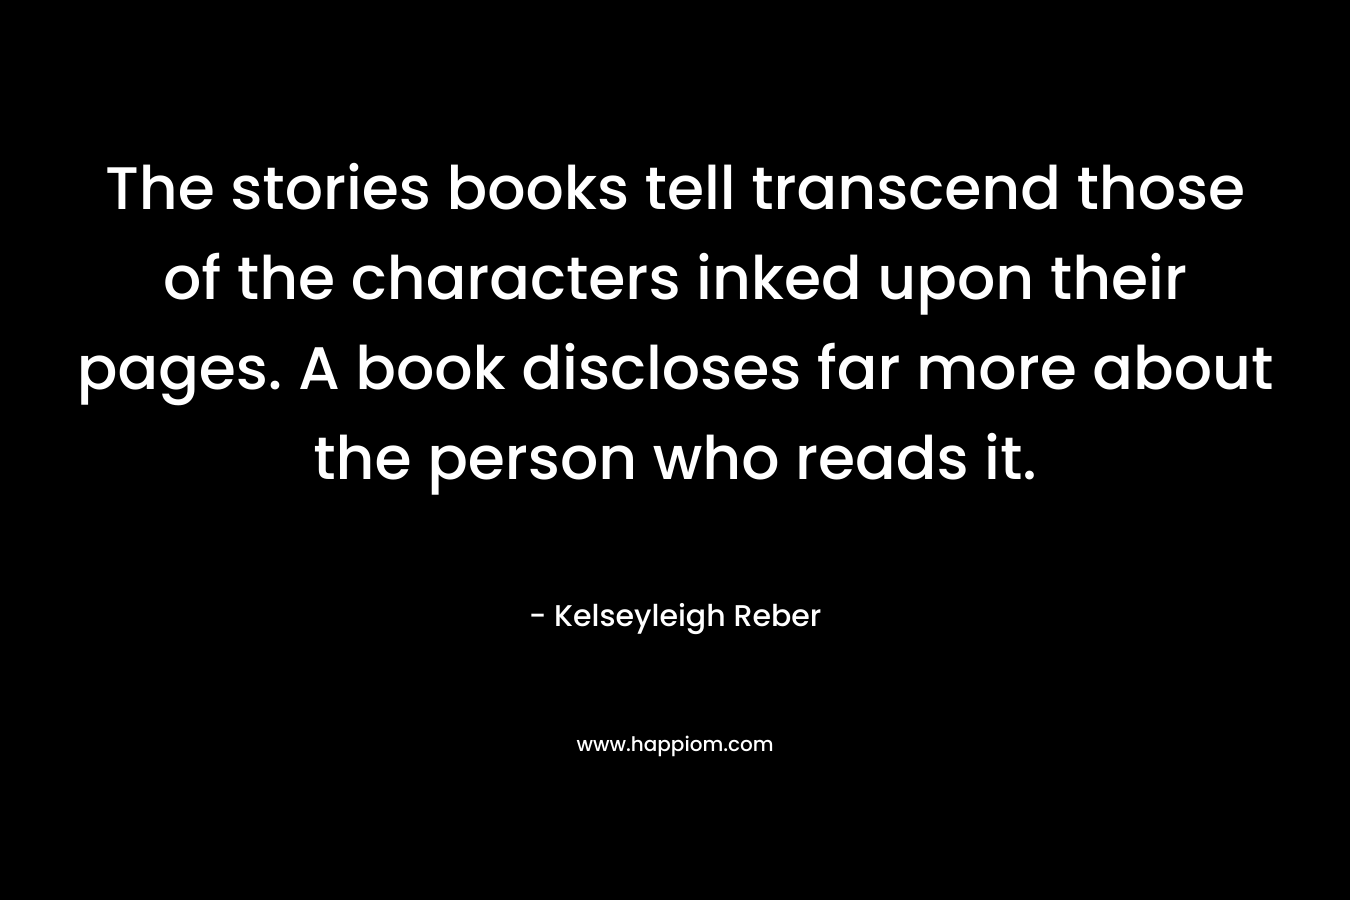 The stories books tell transcend those of the characters inked upon their pages. A book discloses far more about the person who reads it. – Kelseyleigh Reber